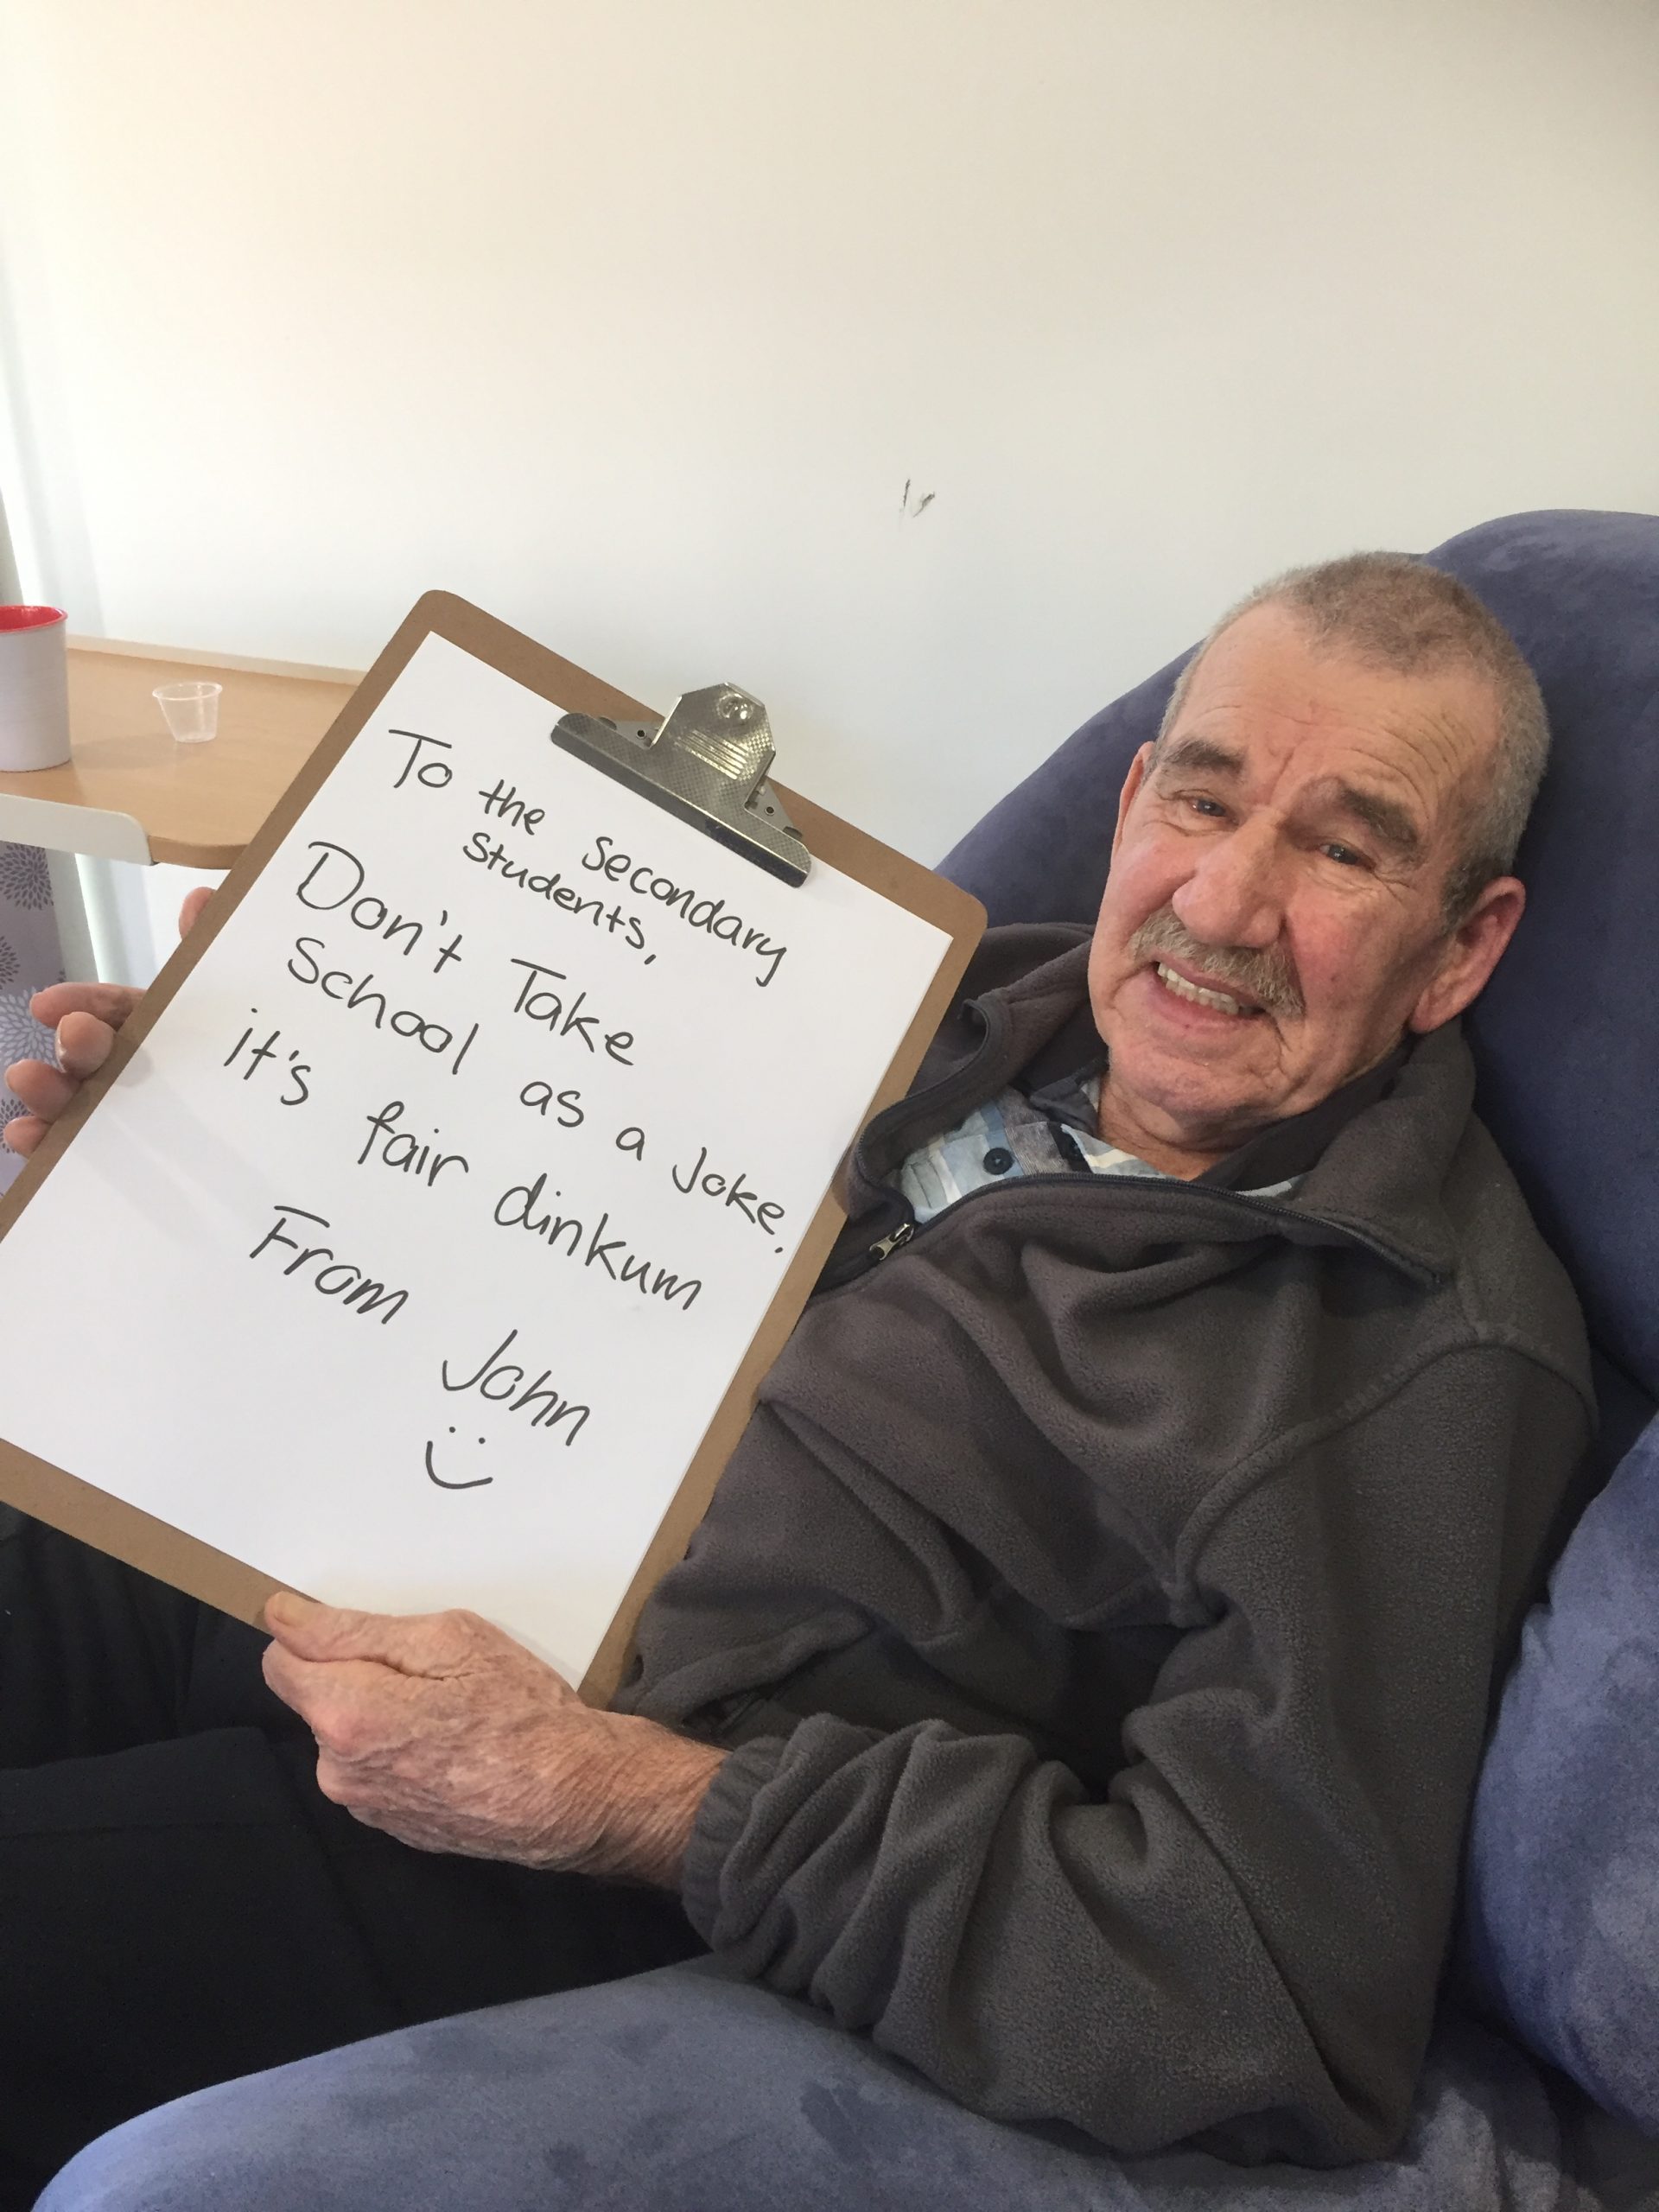 A male resident holds up a hand written sign on a clipboard which reads: "To the secondary students, Don't take school as a joke. It's fair dinkum. From John"